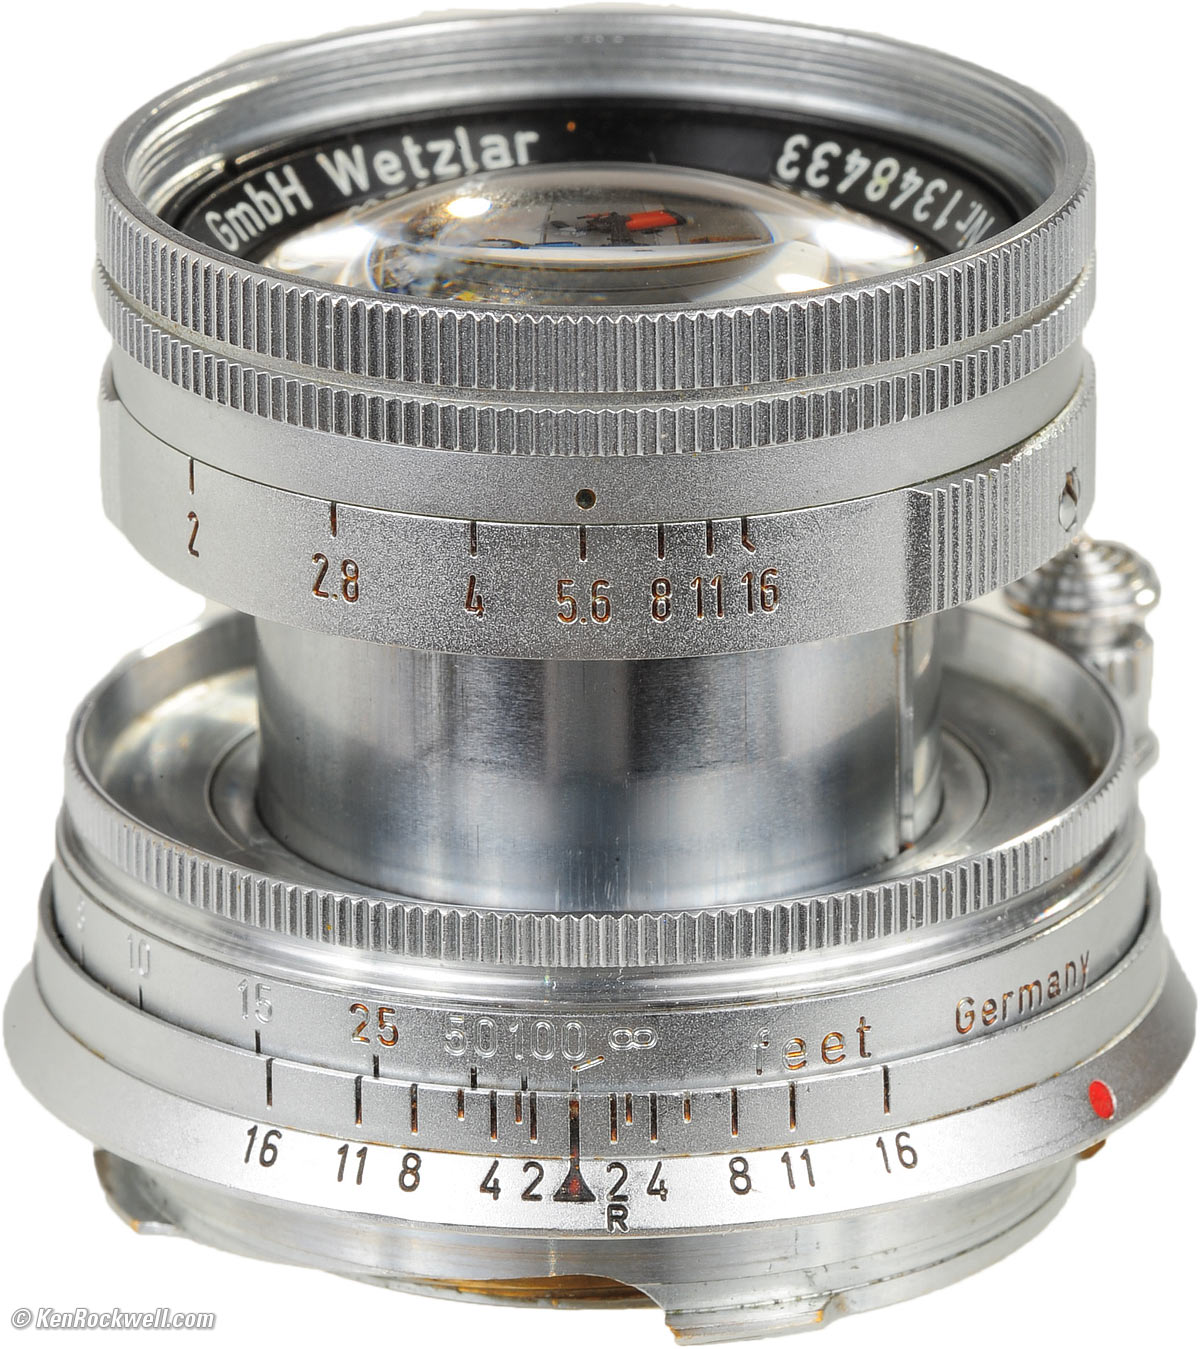 Leica 50mm summicron f2 serial numbers